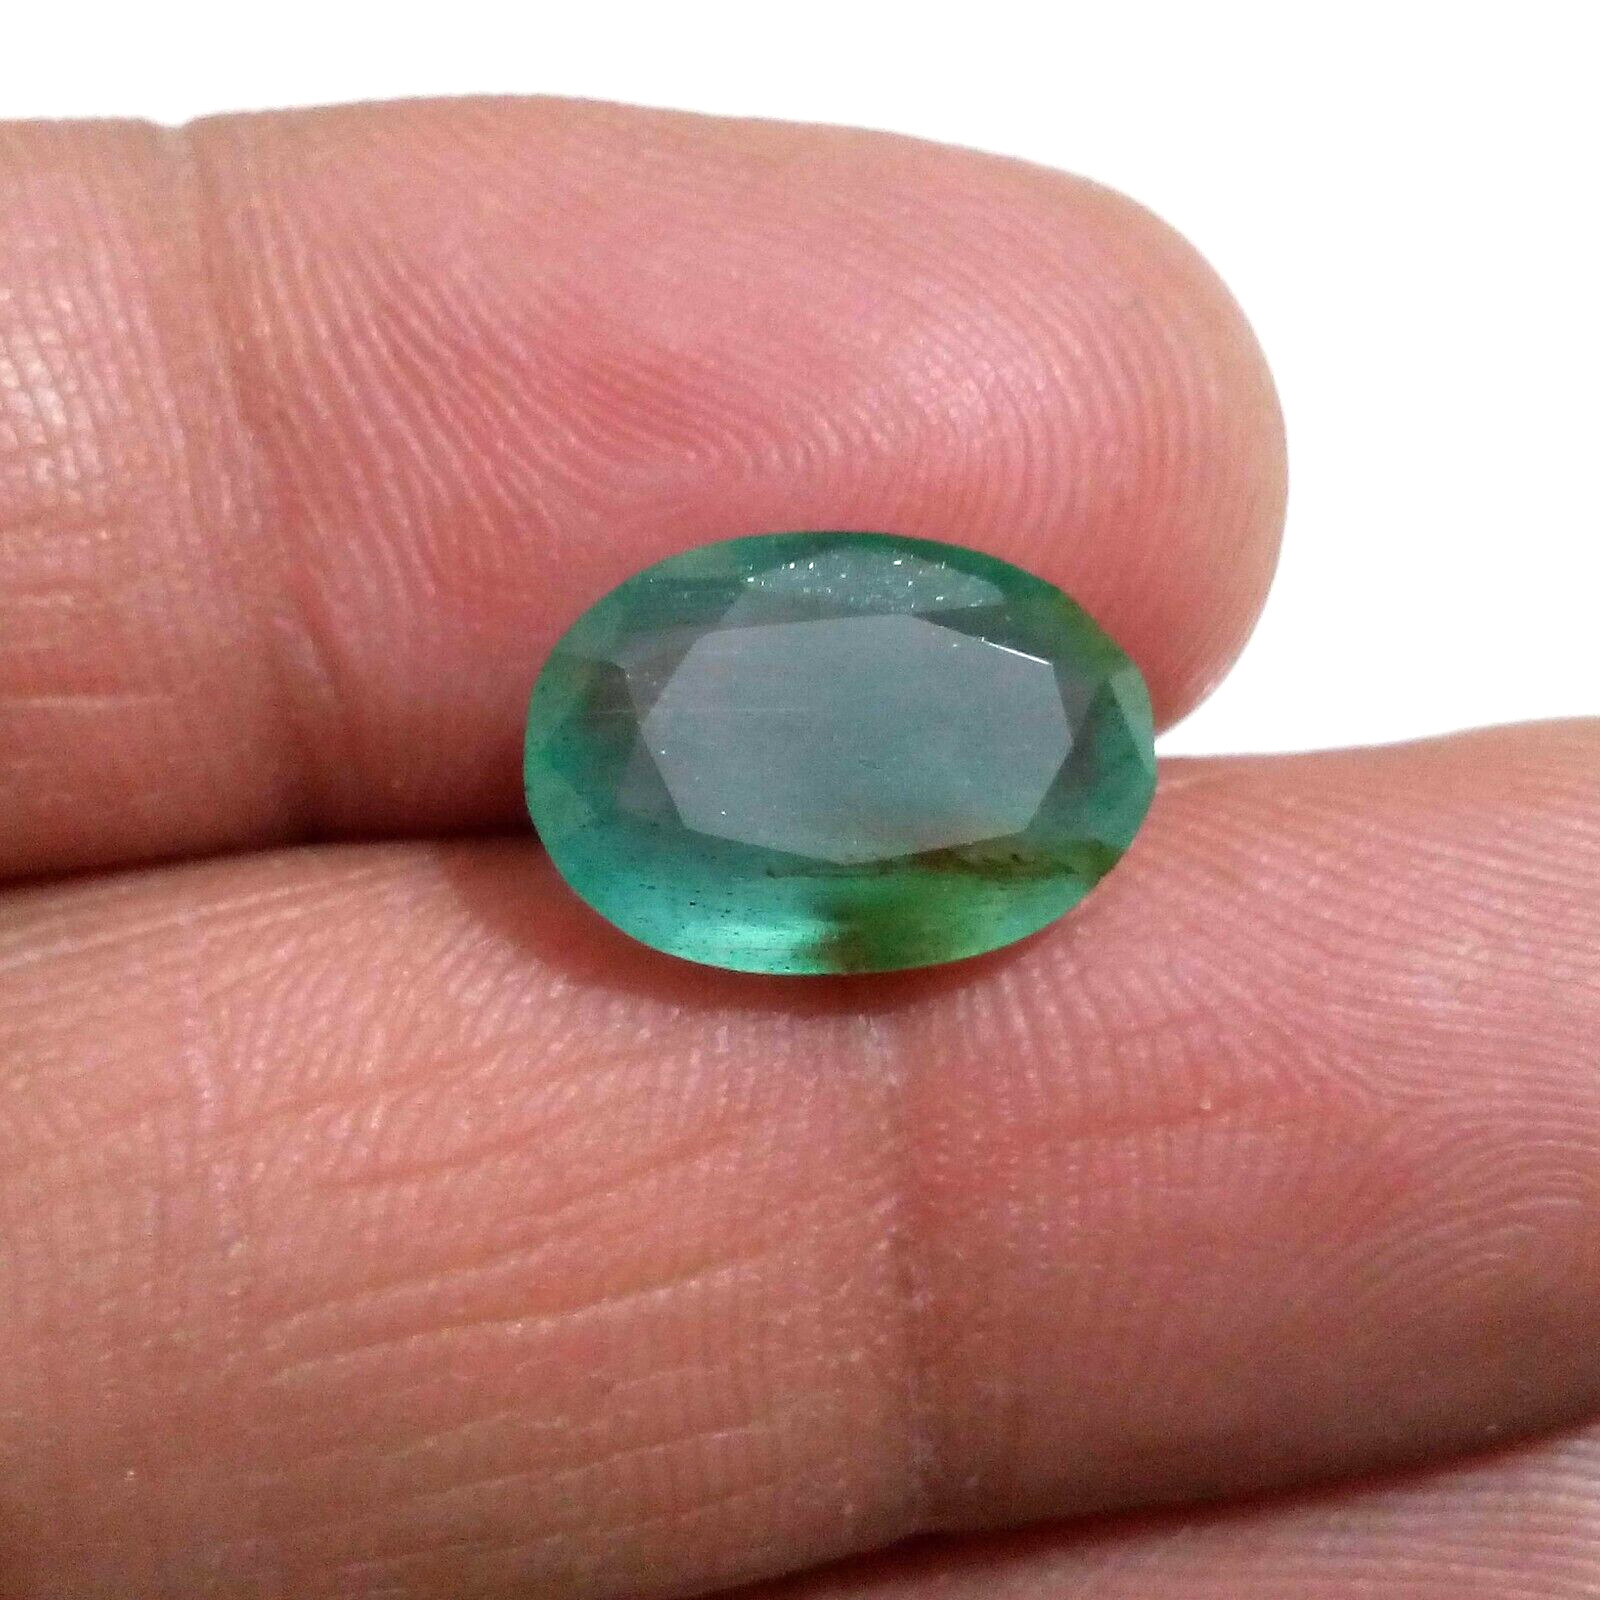 Excellent Zambian Emerald Oval 5.25 Crt Top Quality Green Faceted Loose Gemstone